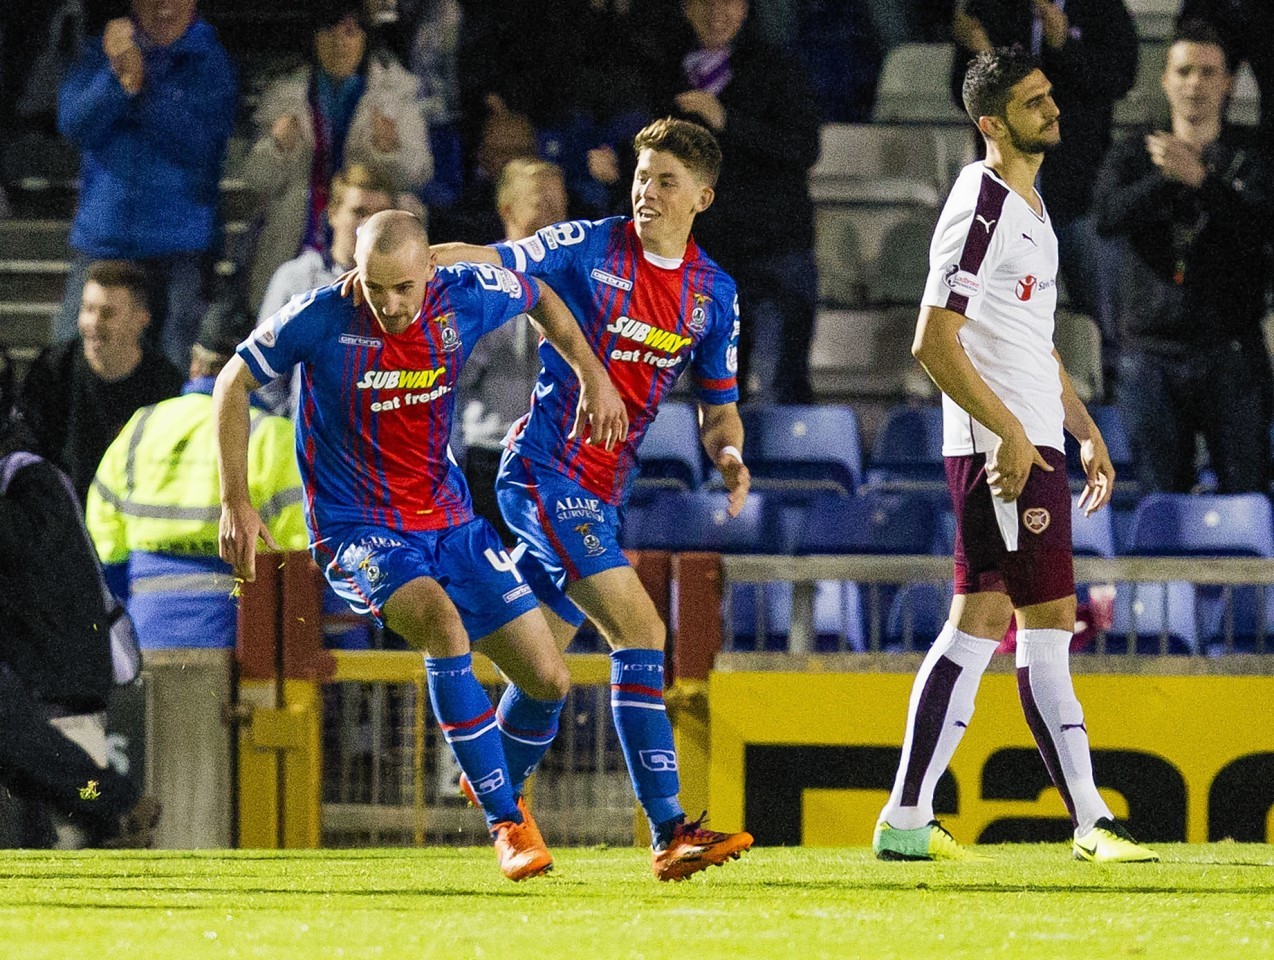  James Vincent (left) is congratulated by team mate Ryan Christie after opening the scoring for Inverness CT